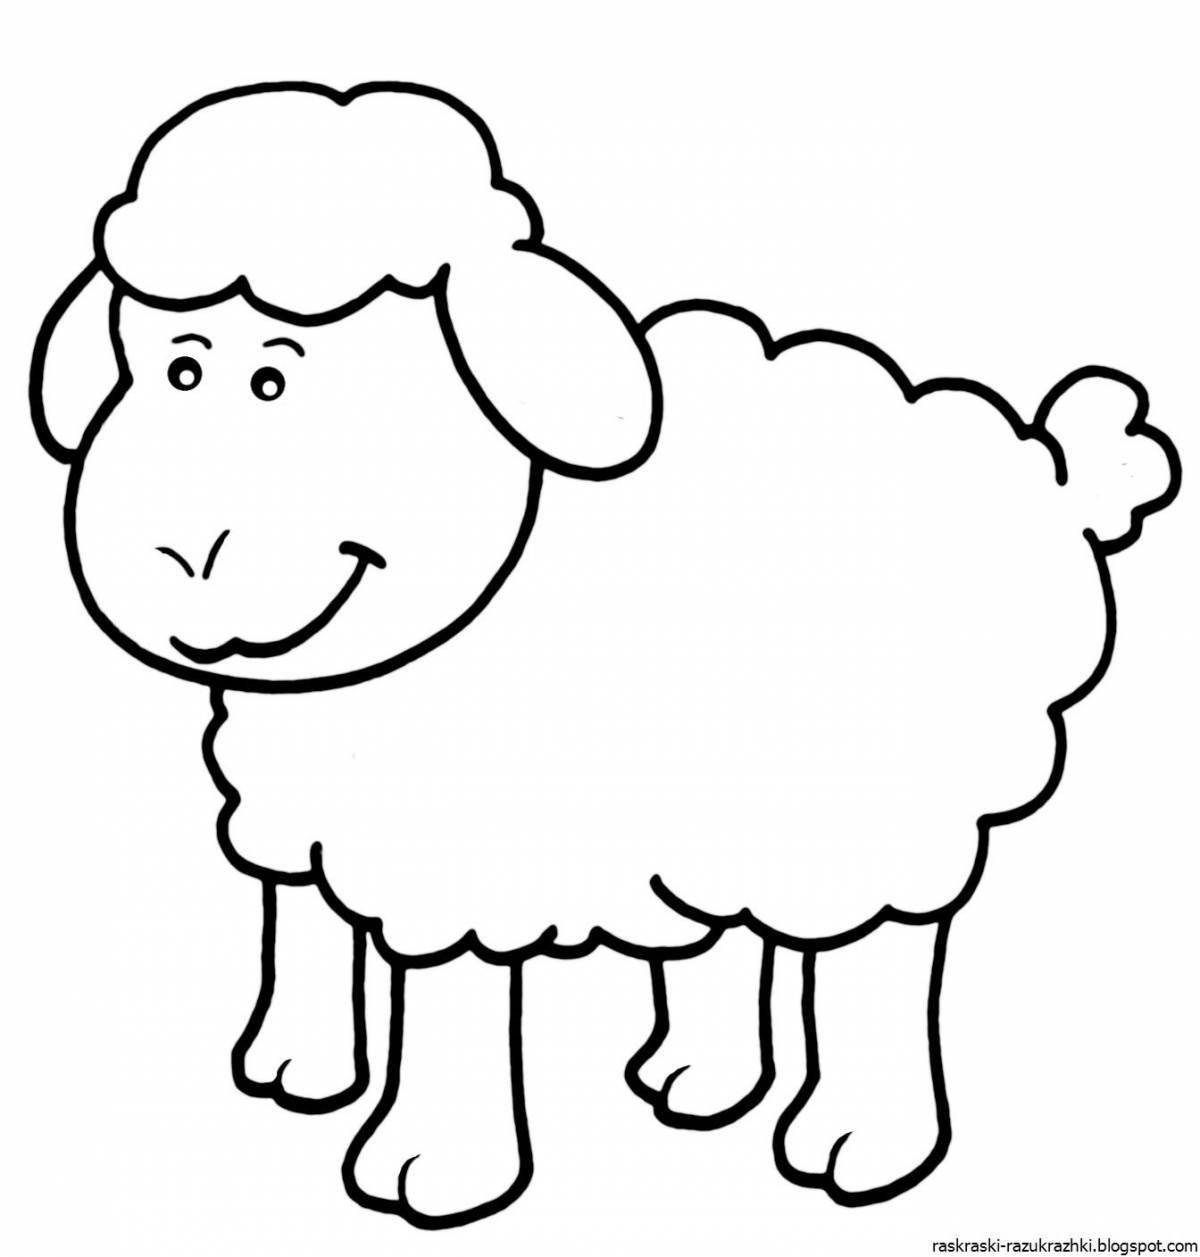 Great sheep coloring book for 4-5 year olds